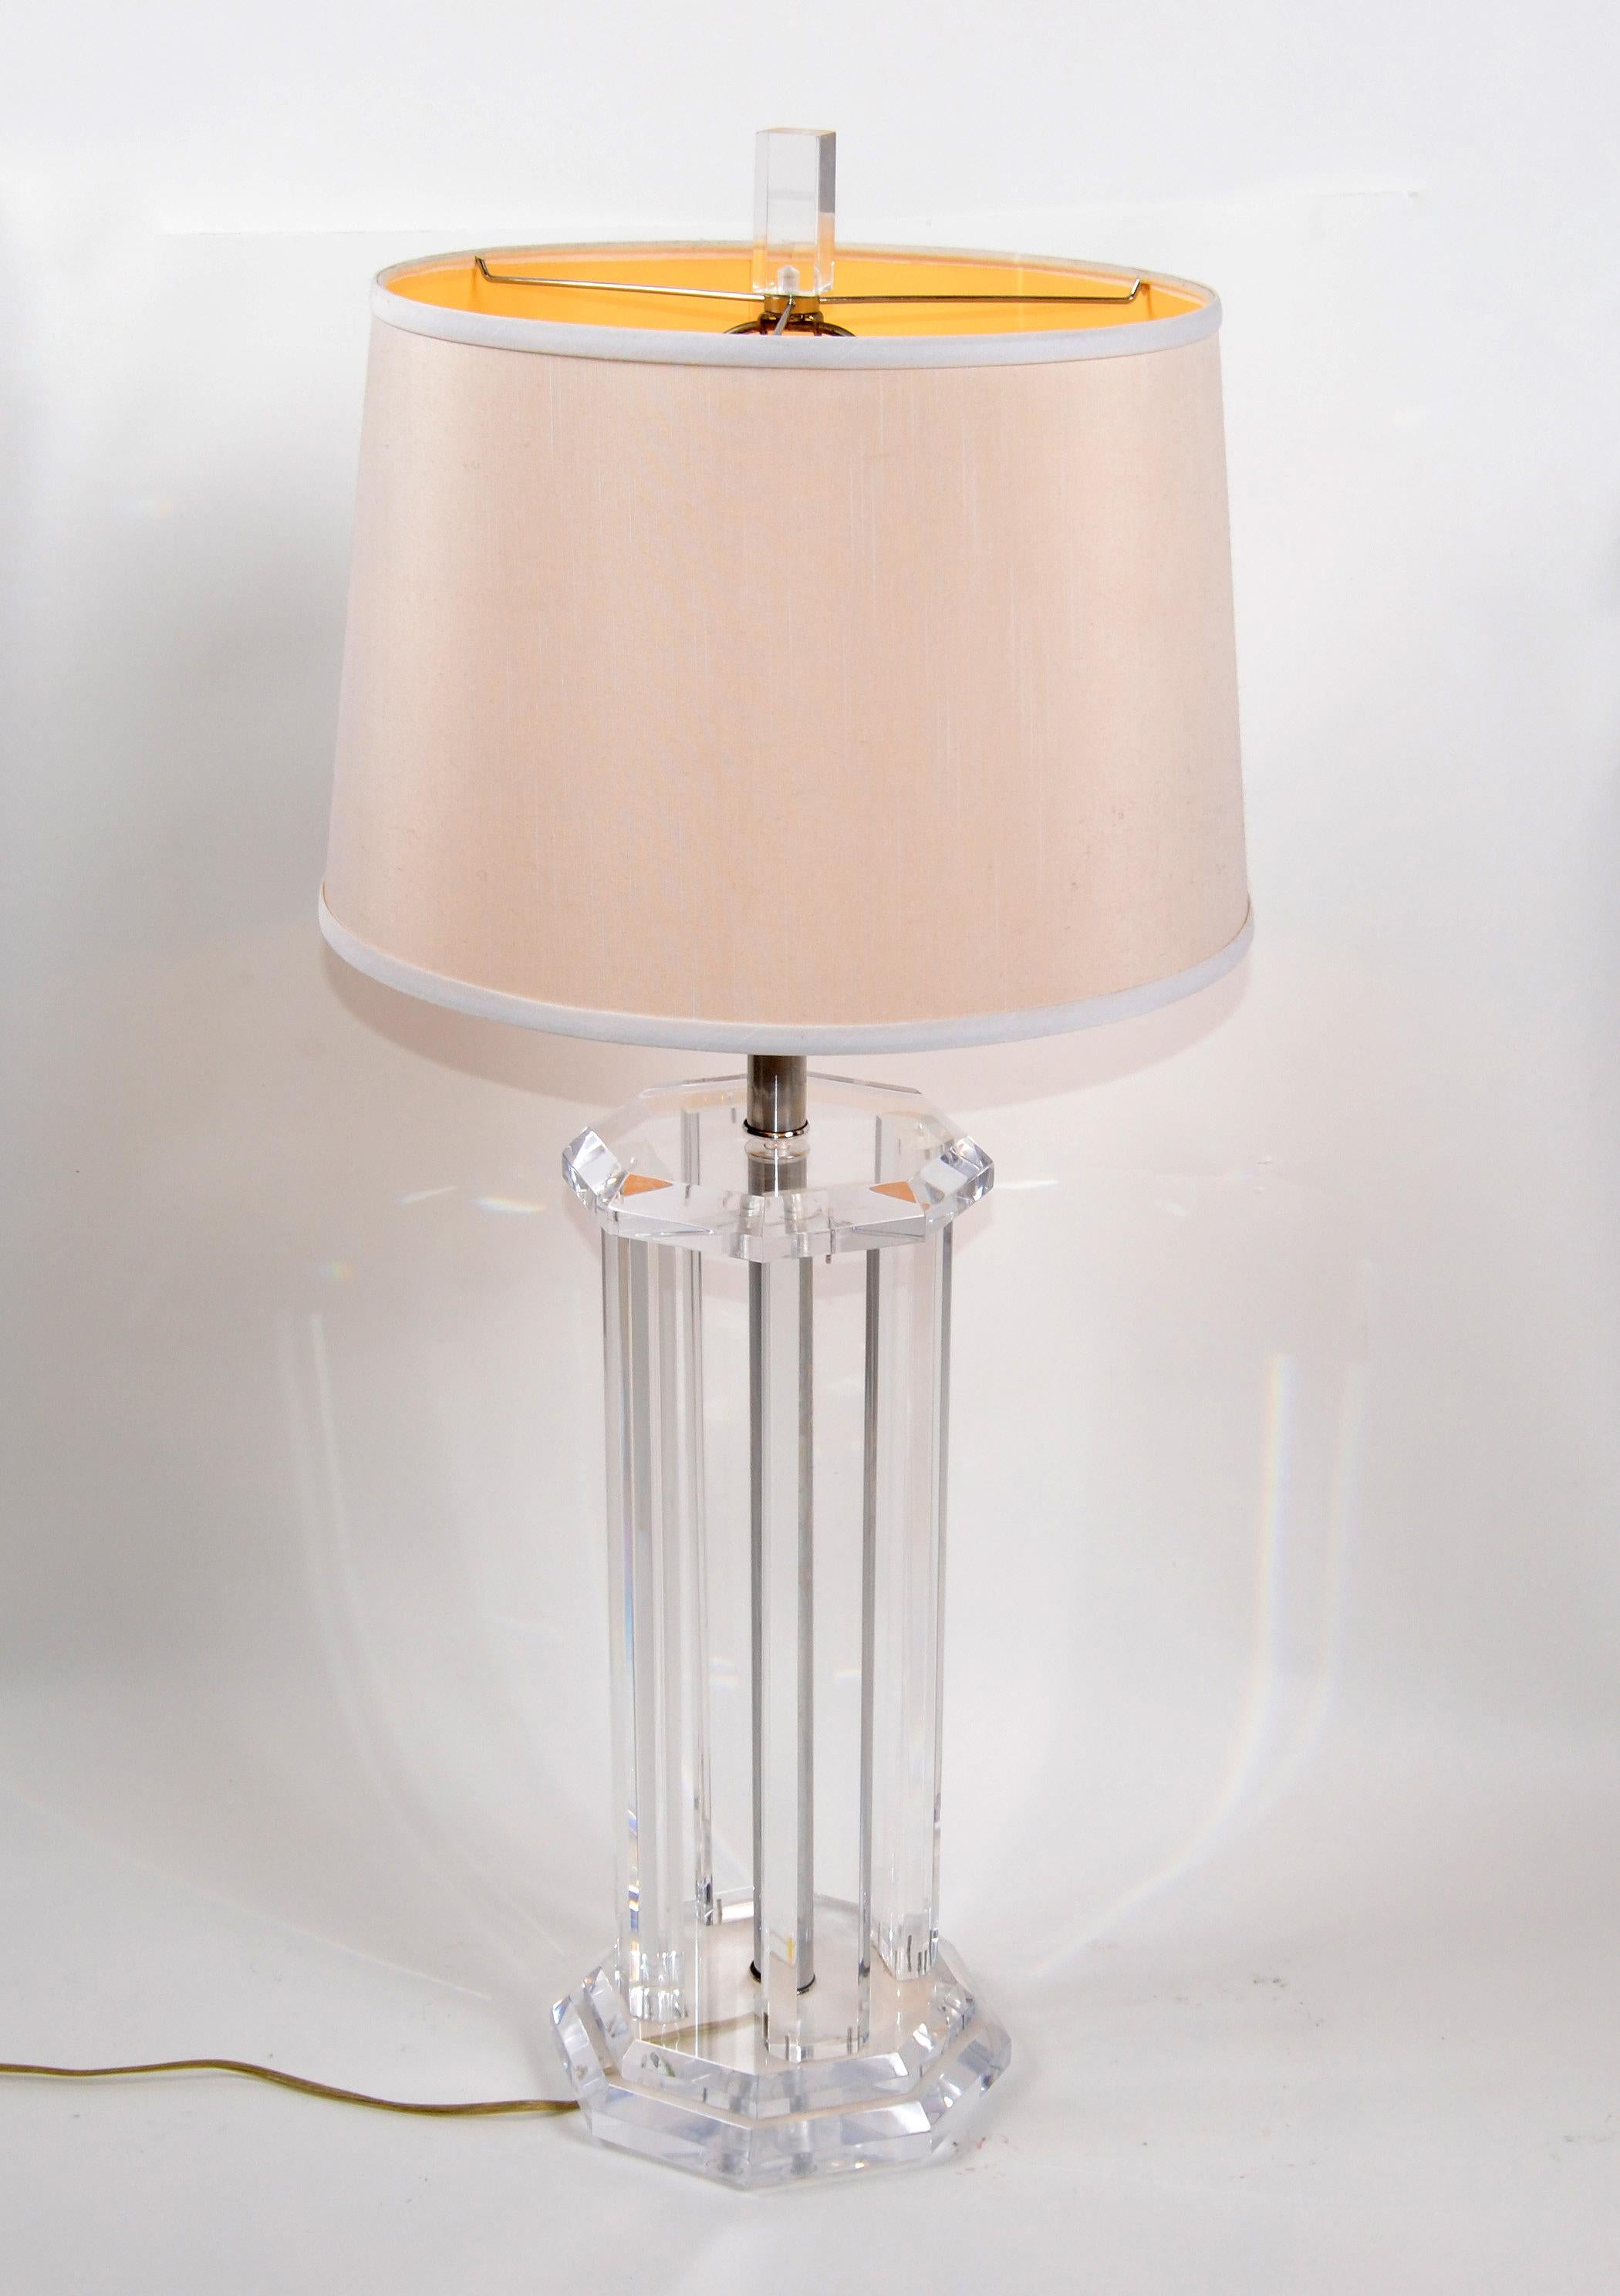 20th Century Chrome and Clear Lucite Mid-Century Modern Octagonal Table Lamp, 1970s For Sale